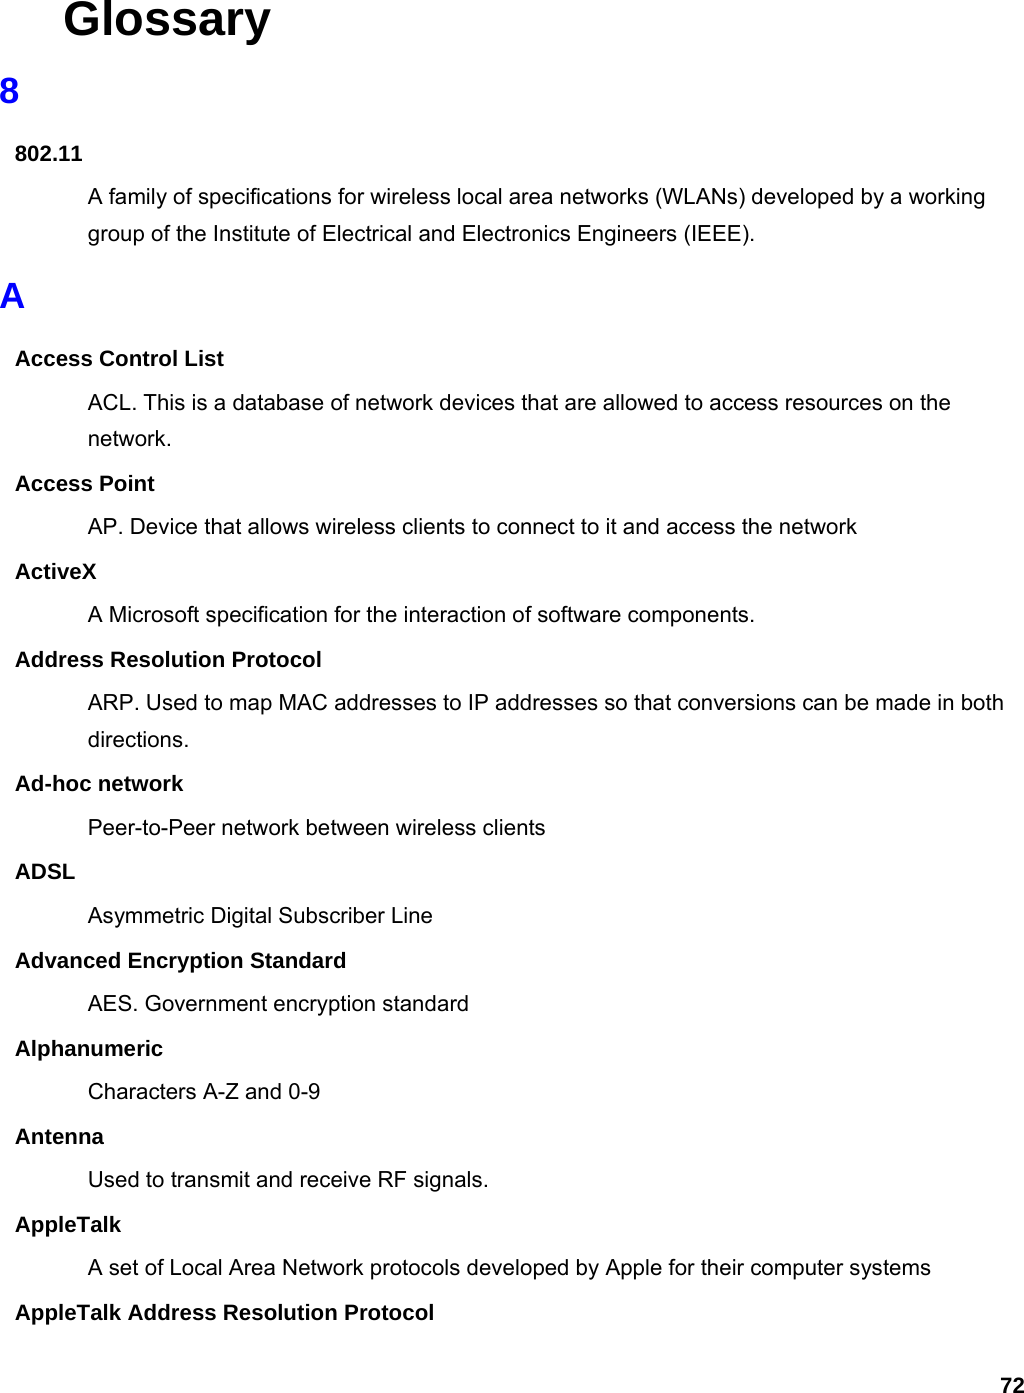 72 Glossary 8 802.11 A family of specifications for wireless local area networks (WLANs) developed by a working group of the Institute of Electrical and Electronics Engineers (IEEE).   A Access Control List ACL. This is a database of network devices that are allowed to access resources on the network. Access Point AP. Device that allows wireless clients to connect to it and access the network ActiveX A Microsoft specification for the interaction of software components.   Address Resolution Protocol ARP. Used to map MAC addresses to IP addresses so that conversions can be made in both directions. Ad-hoc network Peer-to-Peer network between wireless clients ADSL Asymmetric Digital Subscriber Line Advanced Encryption Standard AES. Government encryption standard Alphanumeric Characters A-Z and 0-9 Antenna Used to transmit and receive RF signals. AppleTalk A set of Local Area Network protocols developed by Apple for their computer systems AppleTalk Address Resolution Protocol 